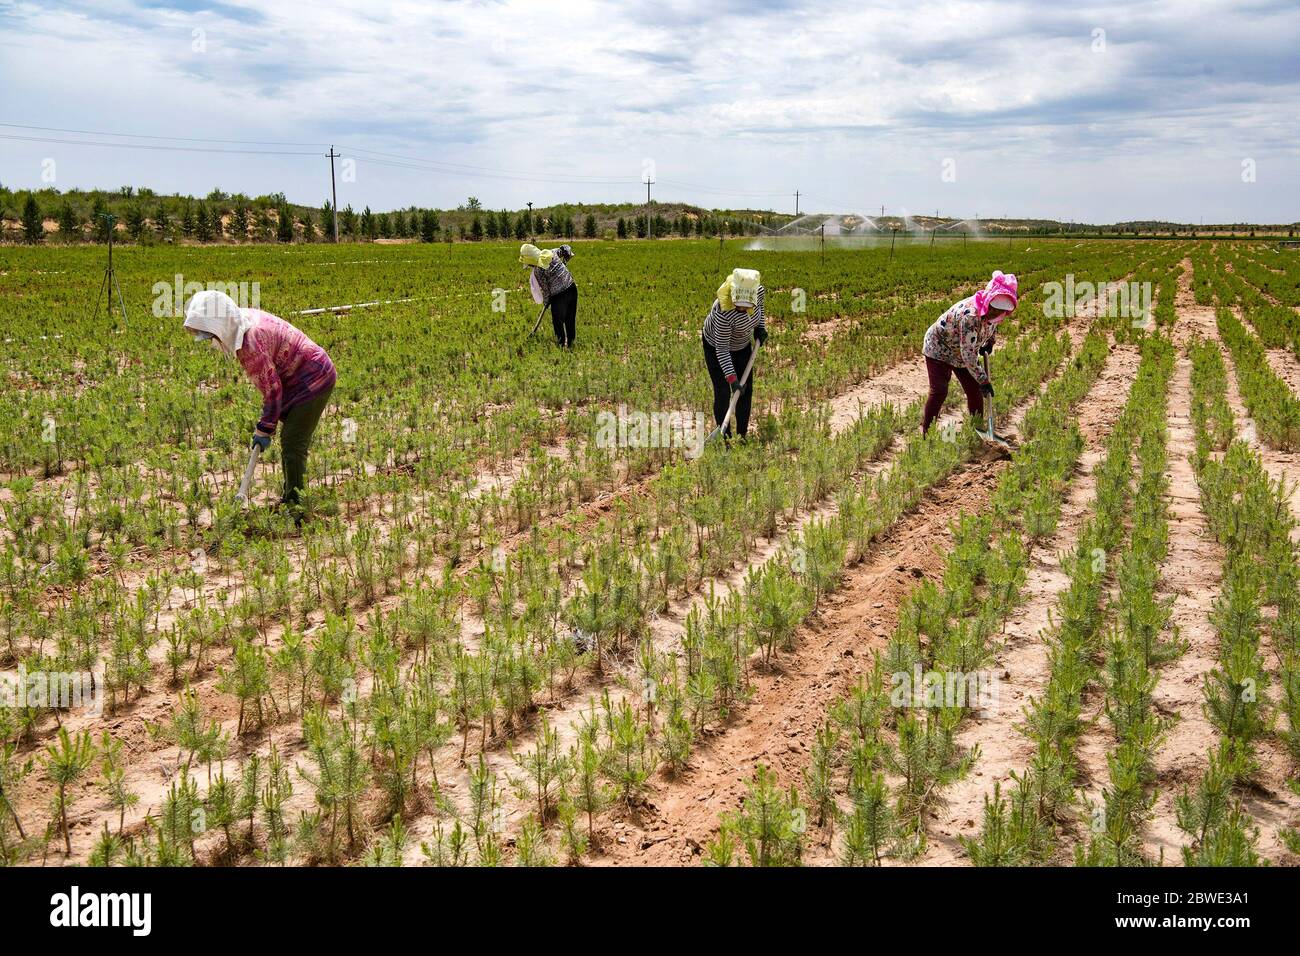 (200601) -- SHENMU, June 1, 2020 (Xinhua) -- Villagers weed a field at Gechougou Village, Shenmu County of northwest China's Shaanxi Province, May 29, 2020. In 2003, Zhang Yinglong resigned his work and returned to his hometown Shenmu County, which located in an isolated desert. He contracted a land of 192,000 Mu (about 12,800 hectares) and made up his mind to plant trees and control sands here. Over the 17 years, Zhang has contracted accumulated 428,000 Mu (about 28,533 hectares) of lands and developed ecological planting and livestock raising industries that can lead the local villagers to i Stock Photo